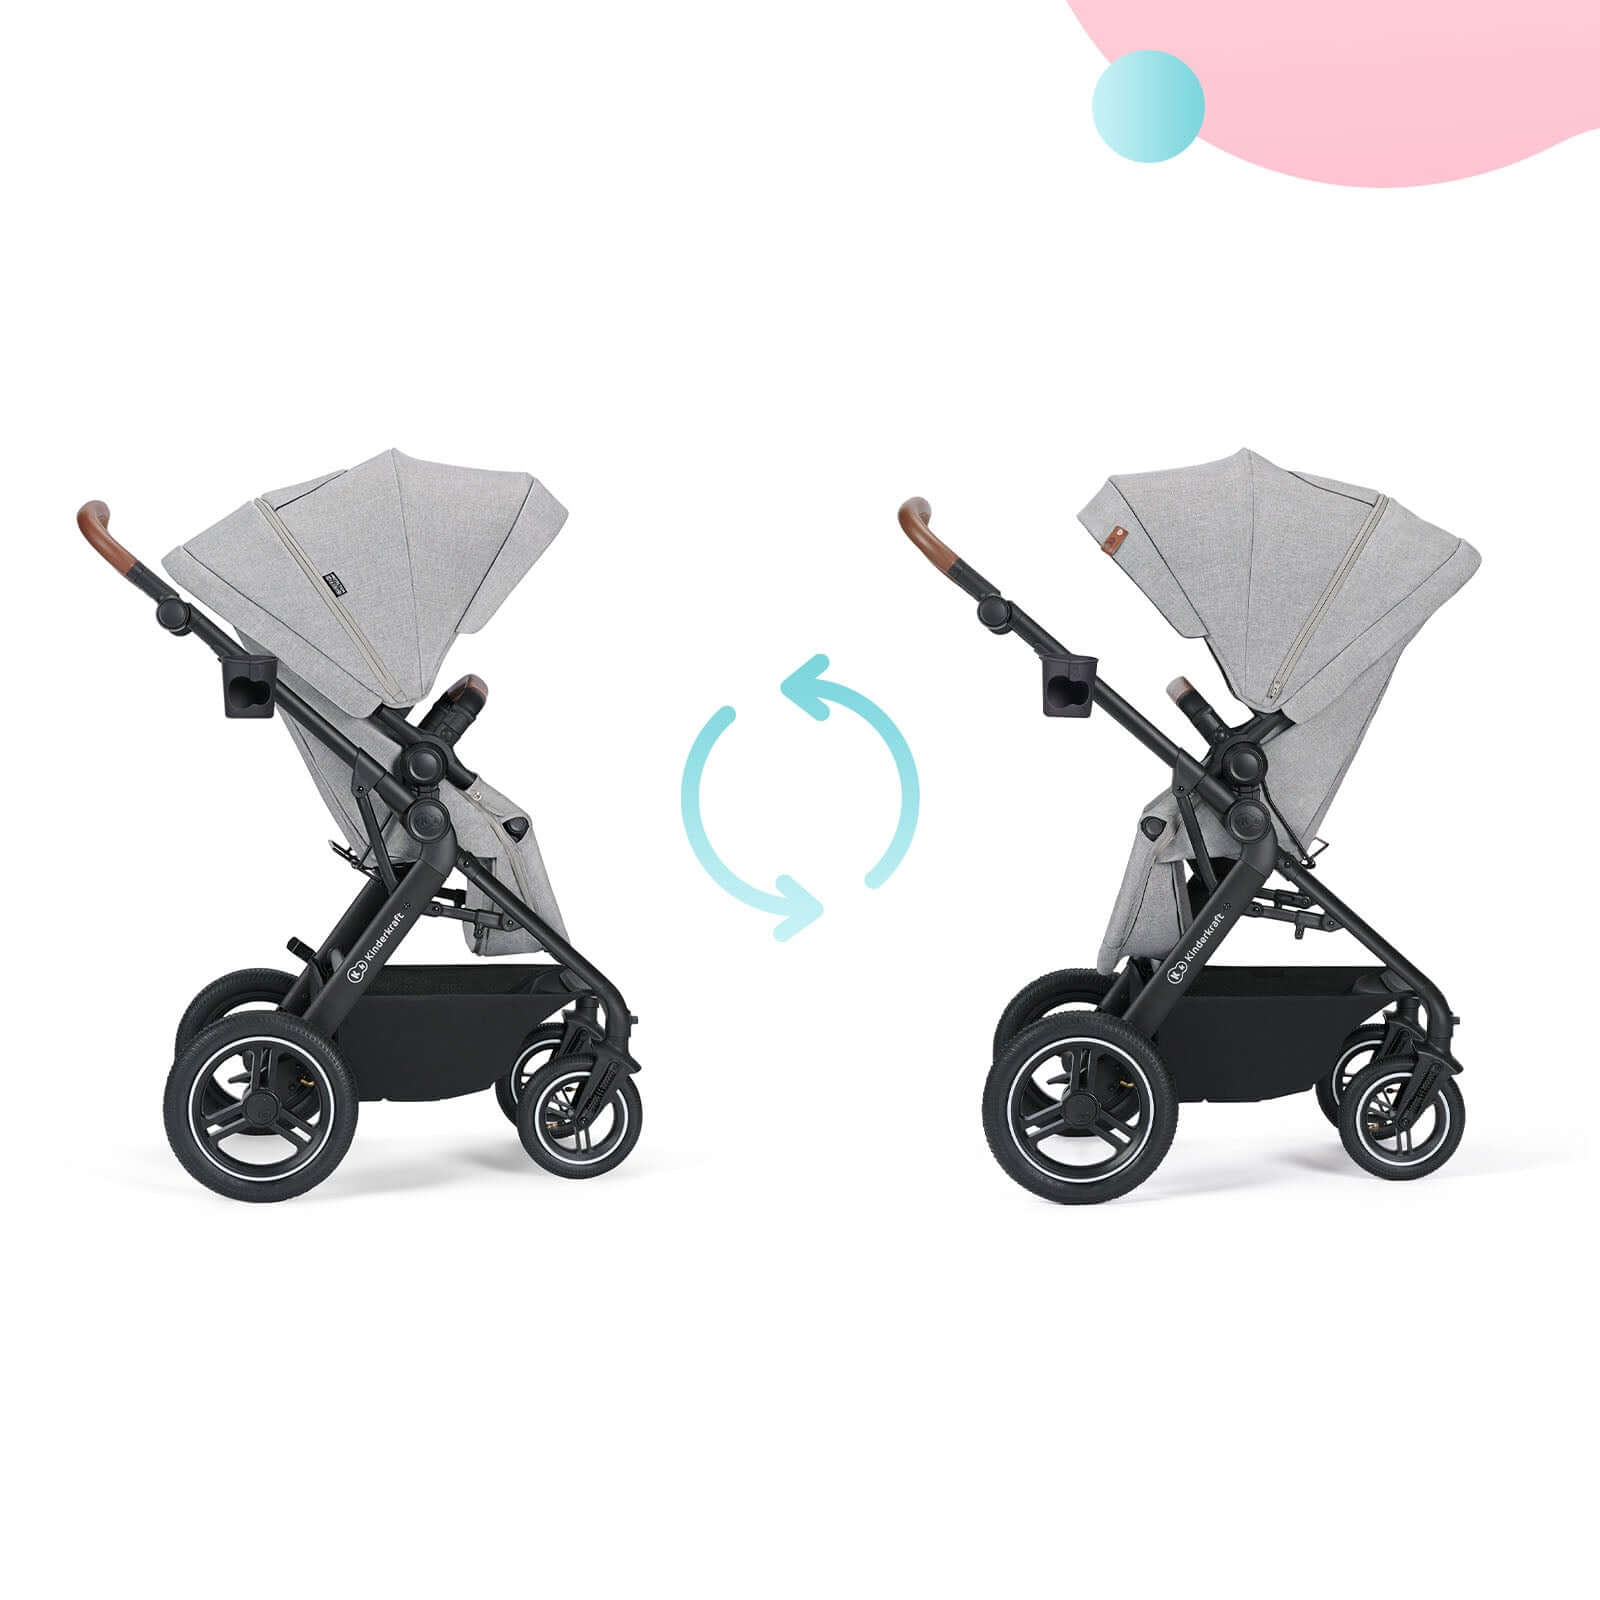 2 Directions of Travel of Kinderkraft B-Tour 3 IN 1 Travel System 